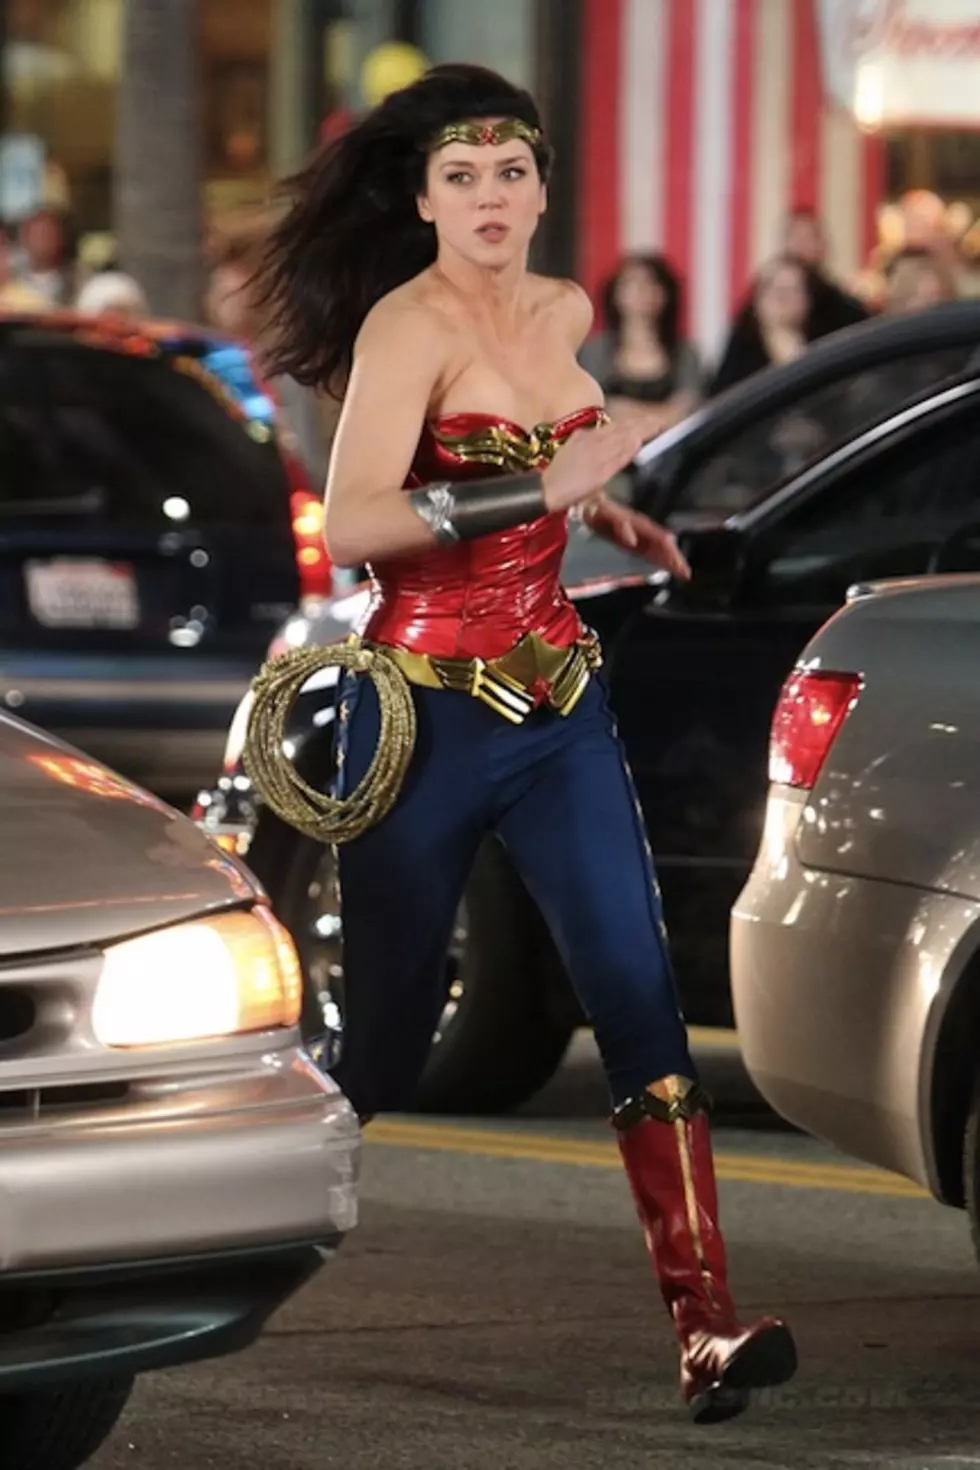 The New Wonder Woman In Action [PICS]